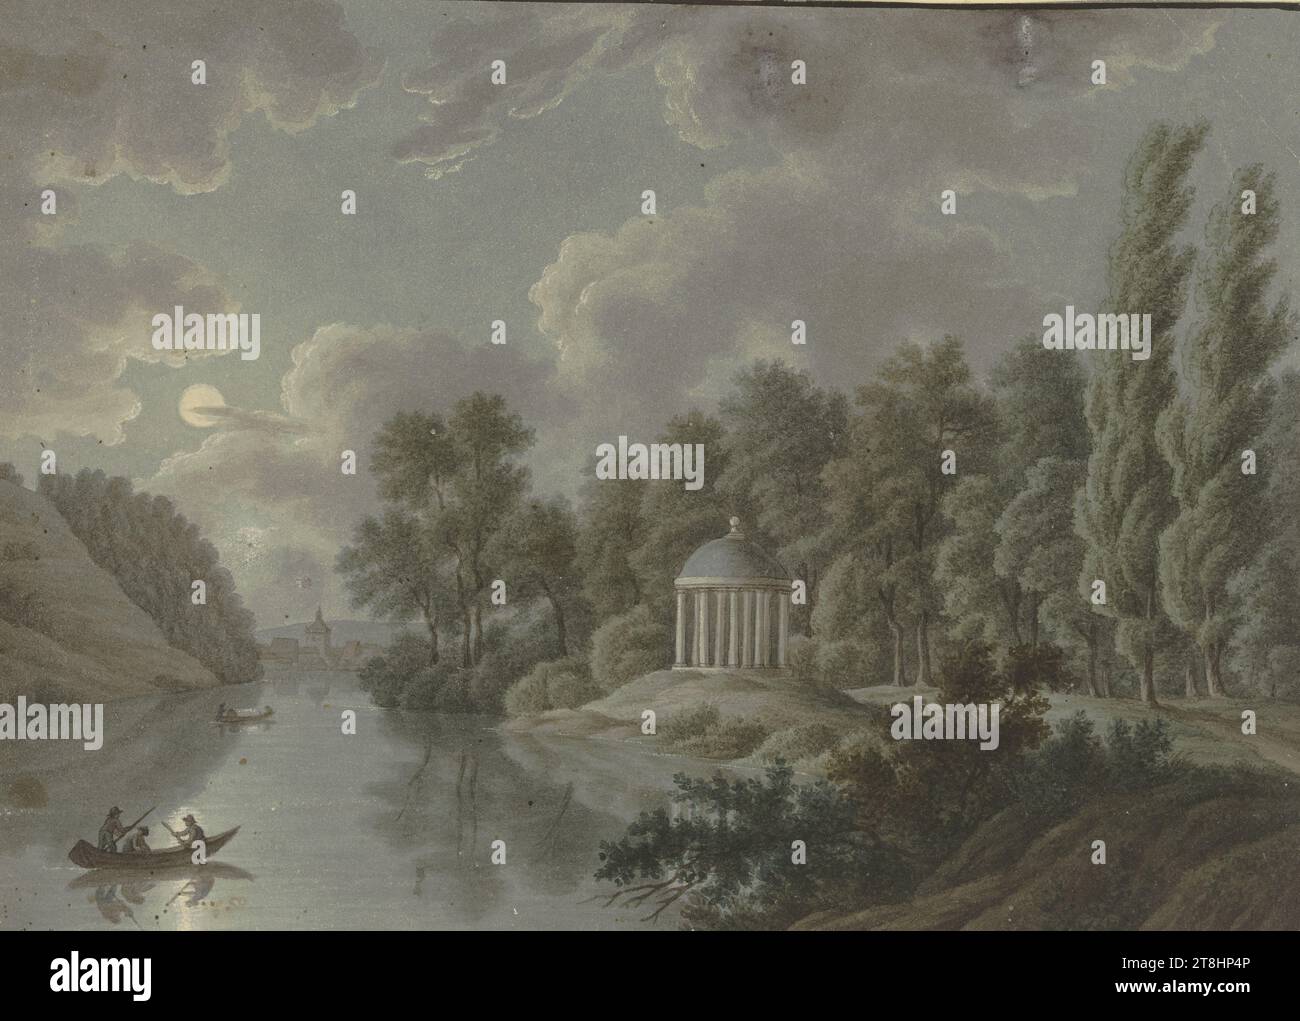 T. LAMEŸ, river section with monopteros in the moonlight, 1811, sheet, 174 x 239 mm, watercolor over pencil, traces, all-round border line with a brush in black, on vellum paper, river section with monopteros in the moonlight, T. LAMEŸ, page, adhesive album of Marie Auguste Emilie Freiin von Günderrode, page 85, part number / total, 1 / 1, 19th CENTURY, DRAWING, watercolor over pencil, traces, border line on all sides with a brush in black, on vellum paper, WATERCOLOR COLOR, GRAPHITE-TONE MIXTURE, VELVET PAPER, WATERCOLOR, BRUSH DRAWING, PENCIL DRAWING, PICTURED DRAWING, AUTONOMOUS DRAWING Stock Photo